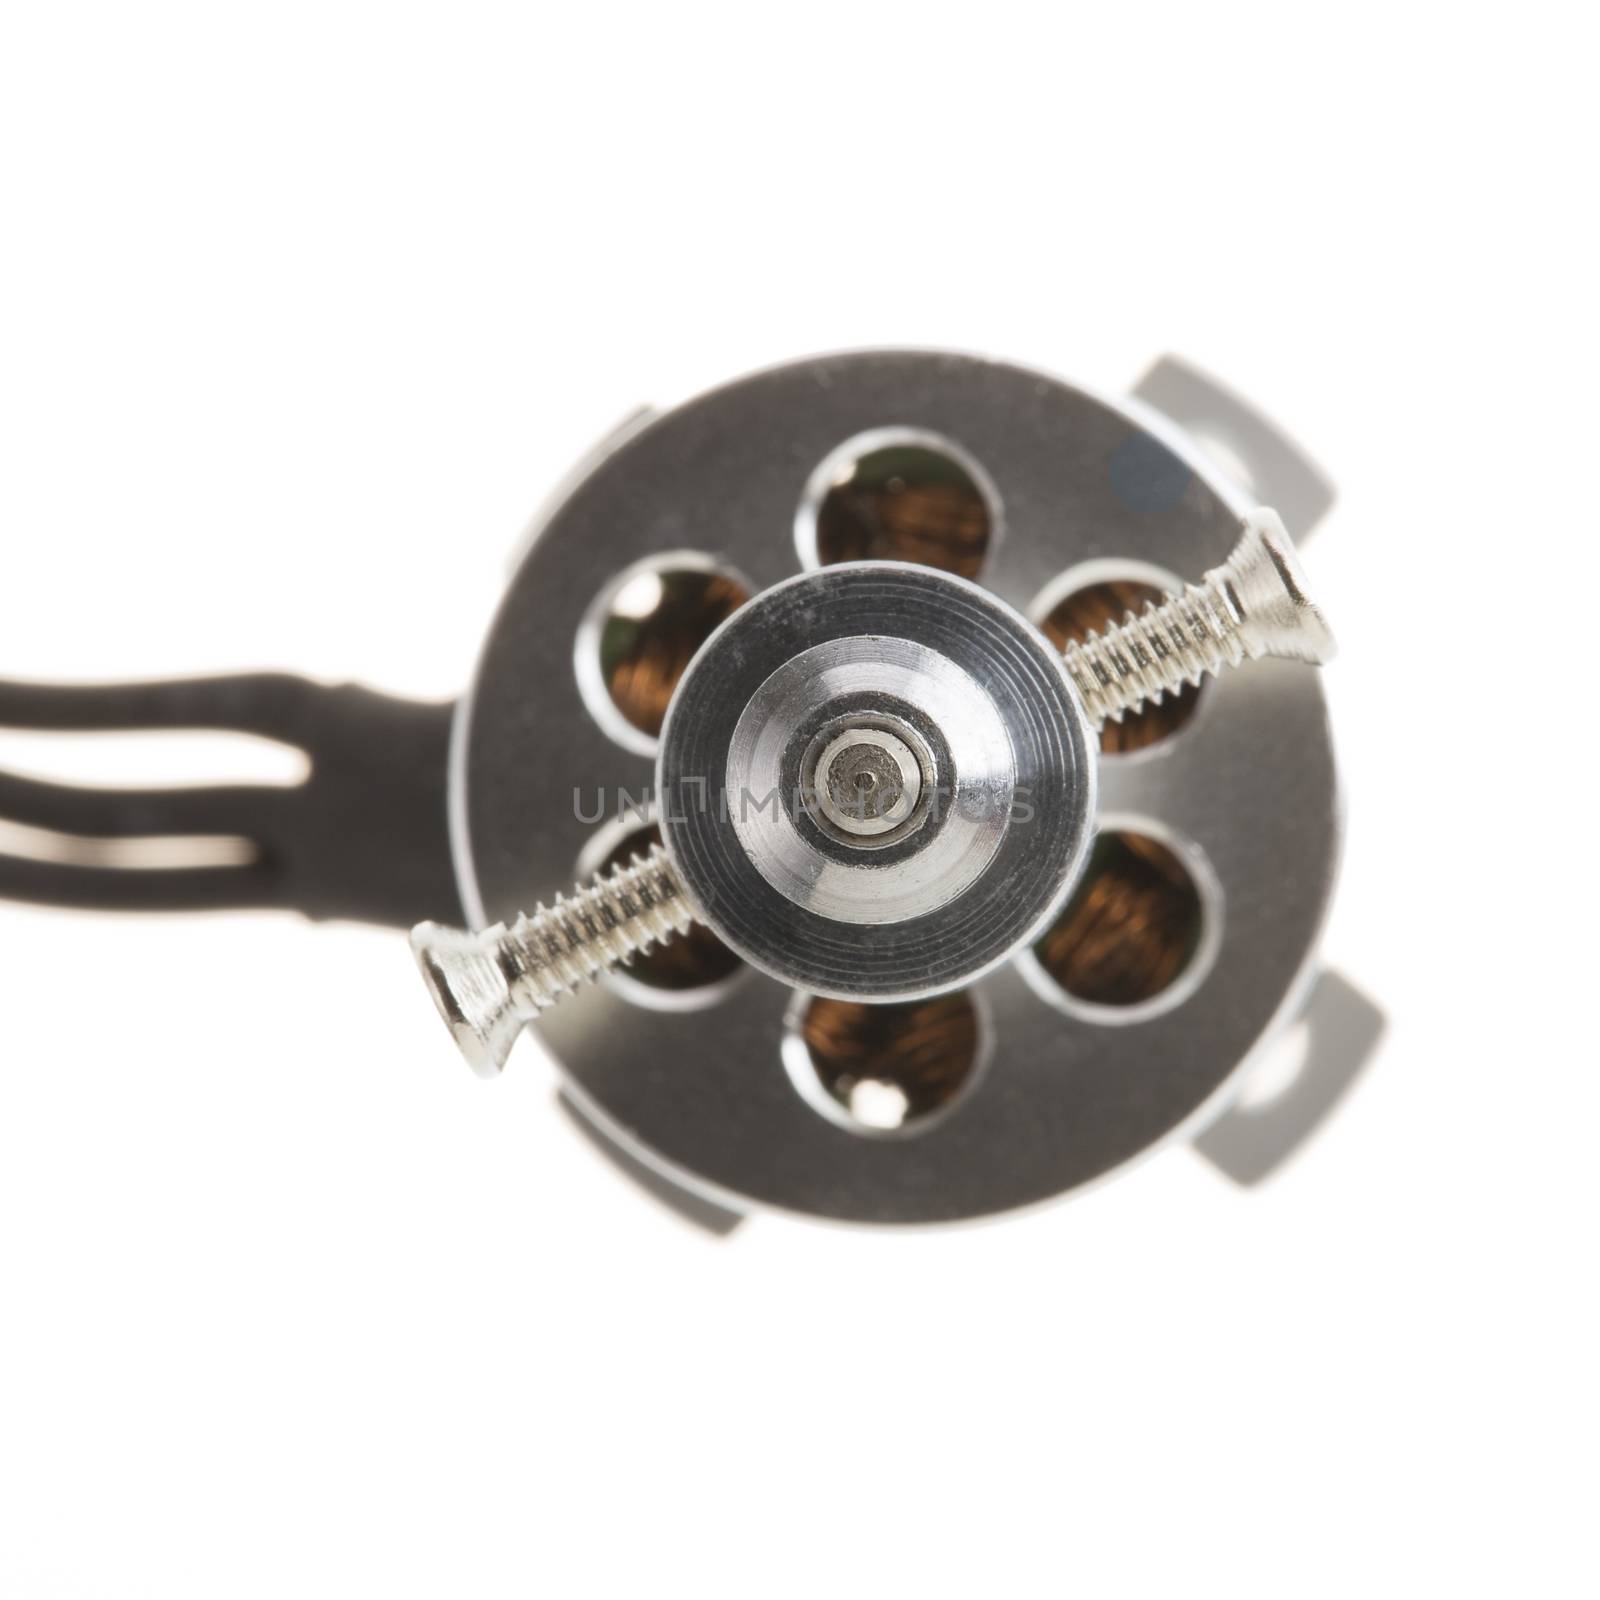 Small Brushless motor for model airplane or drone with propeller mount.